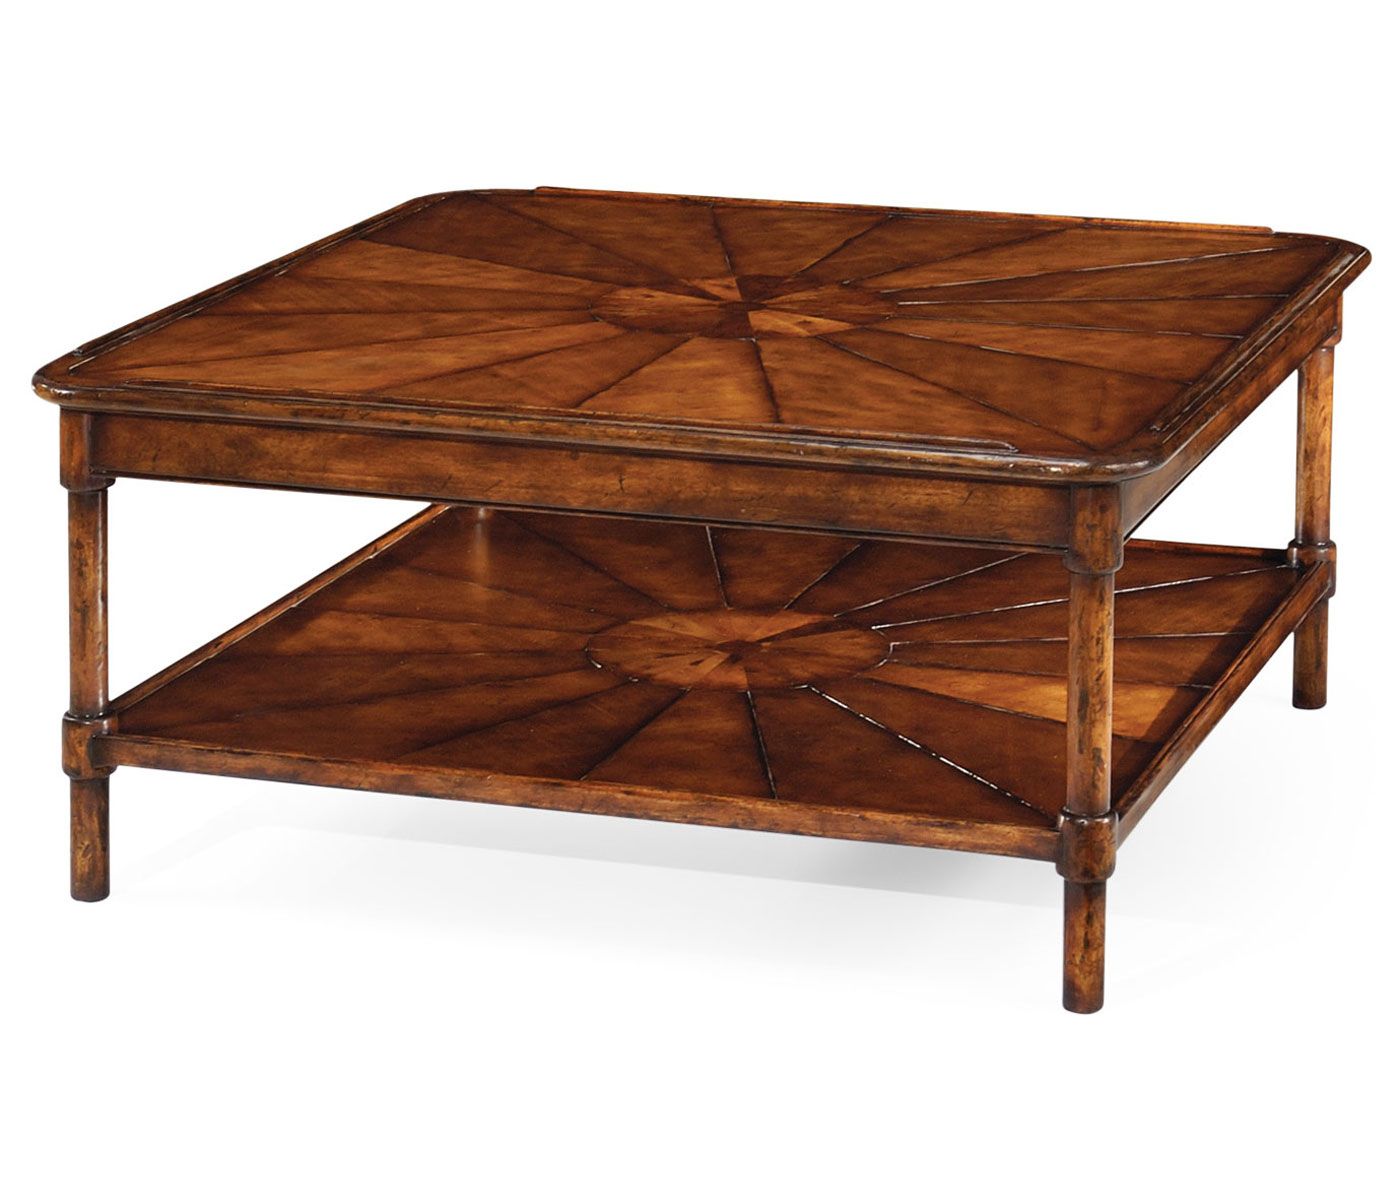 Widely Used Hand Finished Walnut Coffee Tables Regarding Square Rustic Walnut Coffee Table (View 8 of 20)